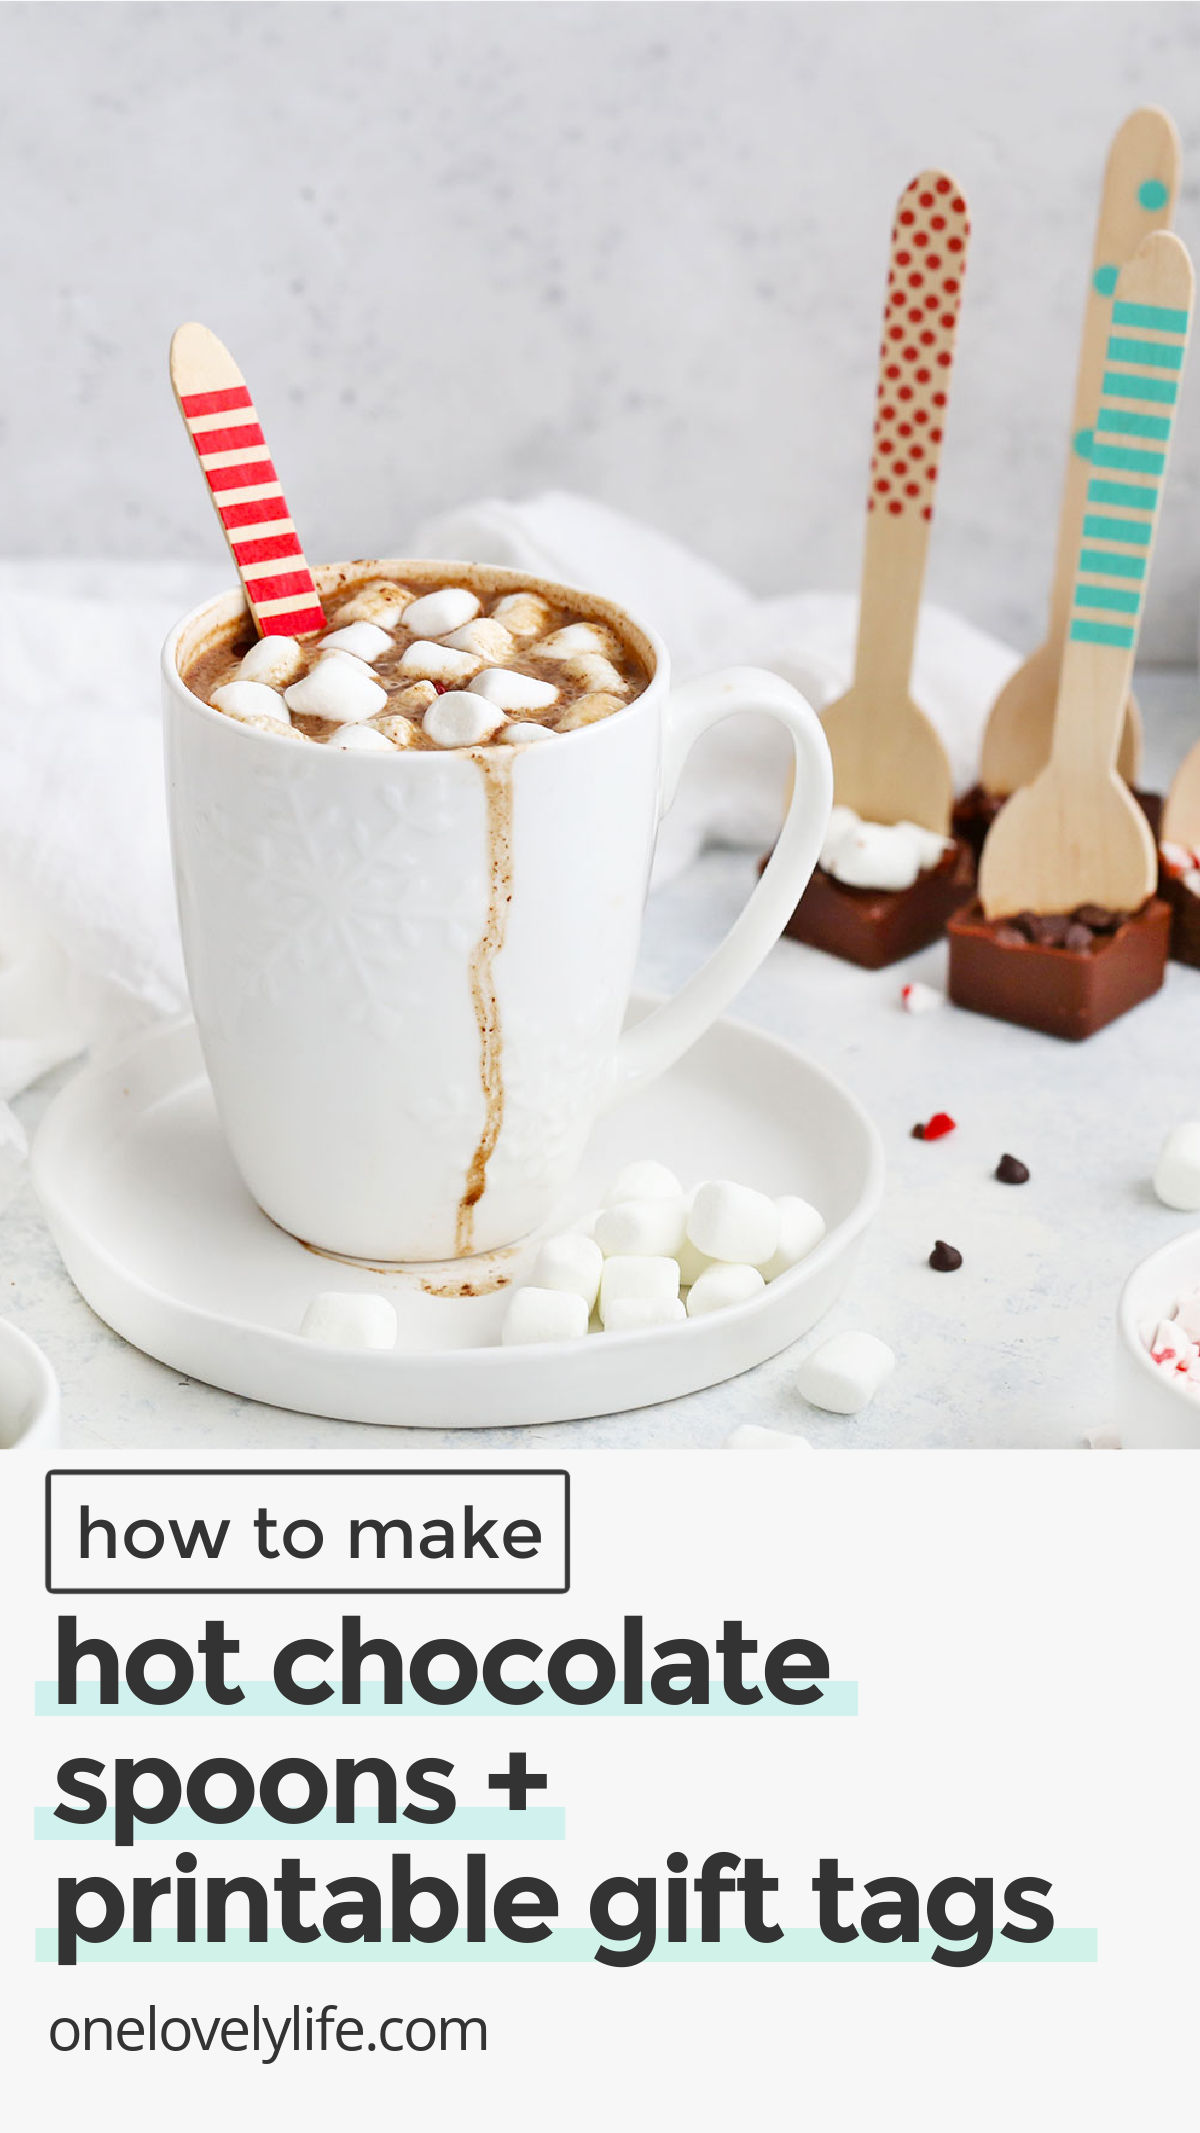 Hot Chocolate Spoons + FREE PRINTABLE GIFT TAGS! These chocolate-coated spoons are perfect for making homemade hot chocolate. They make a fun winter project or easy DIY holiday gift for friends and neighbors! (Gluten-free, dairy-free, paleo & vegan-friendly!)